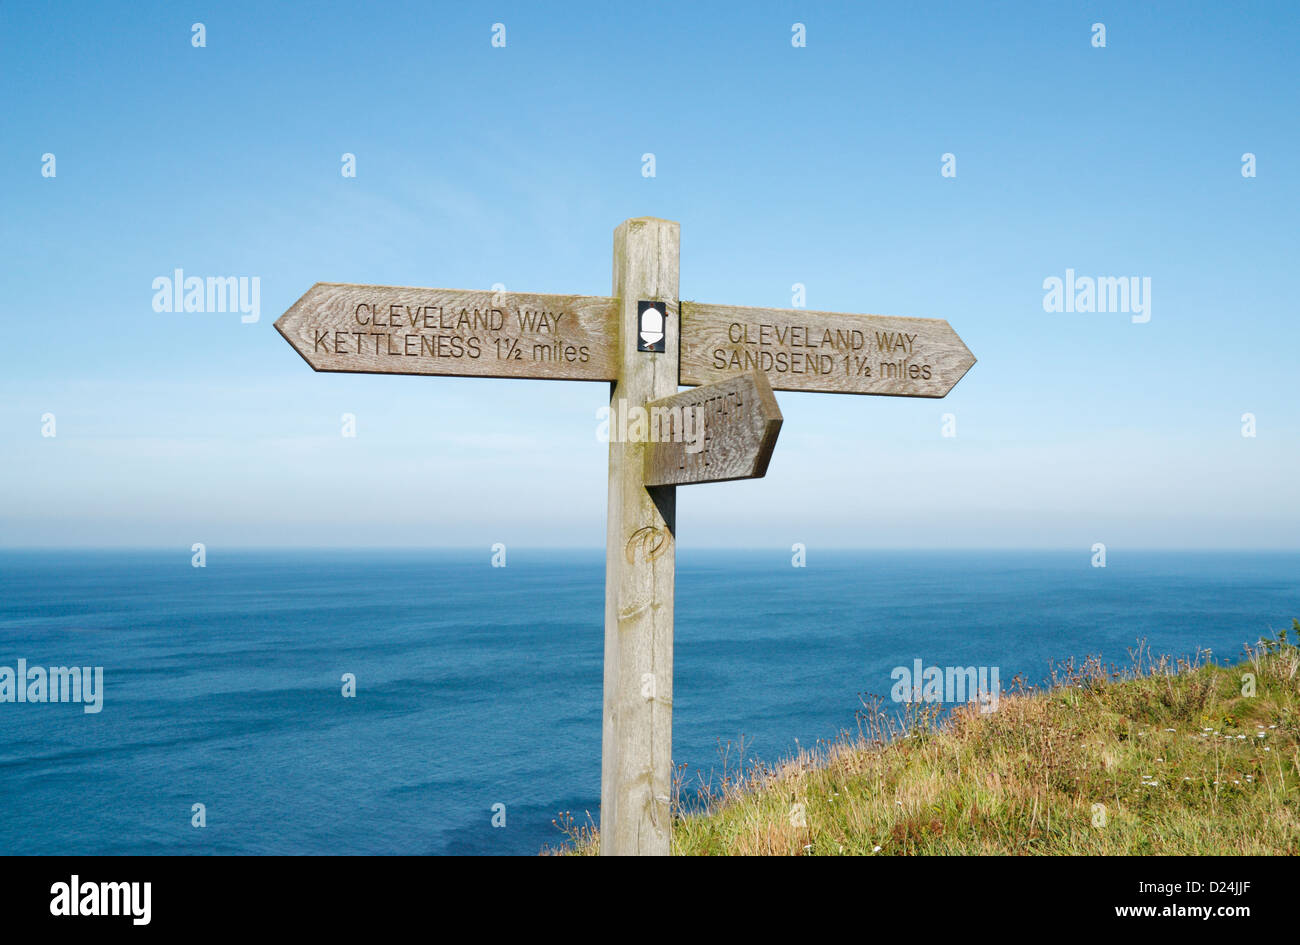 The Cleveland Way footpath sign on North Yorkshire coast near Sandsend, Whitby, England, UK Stock Photo